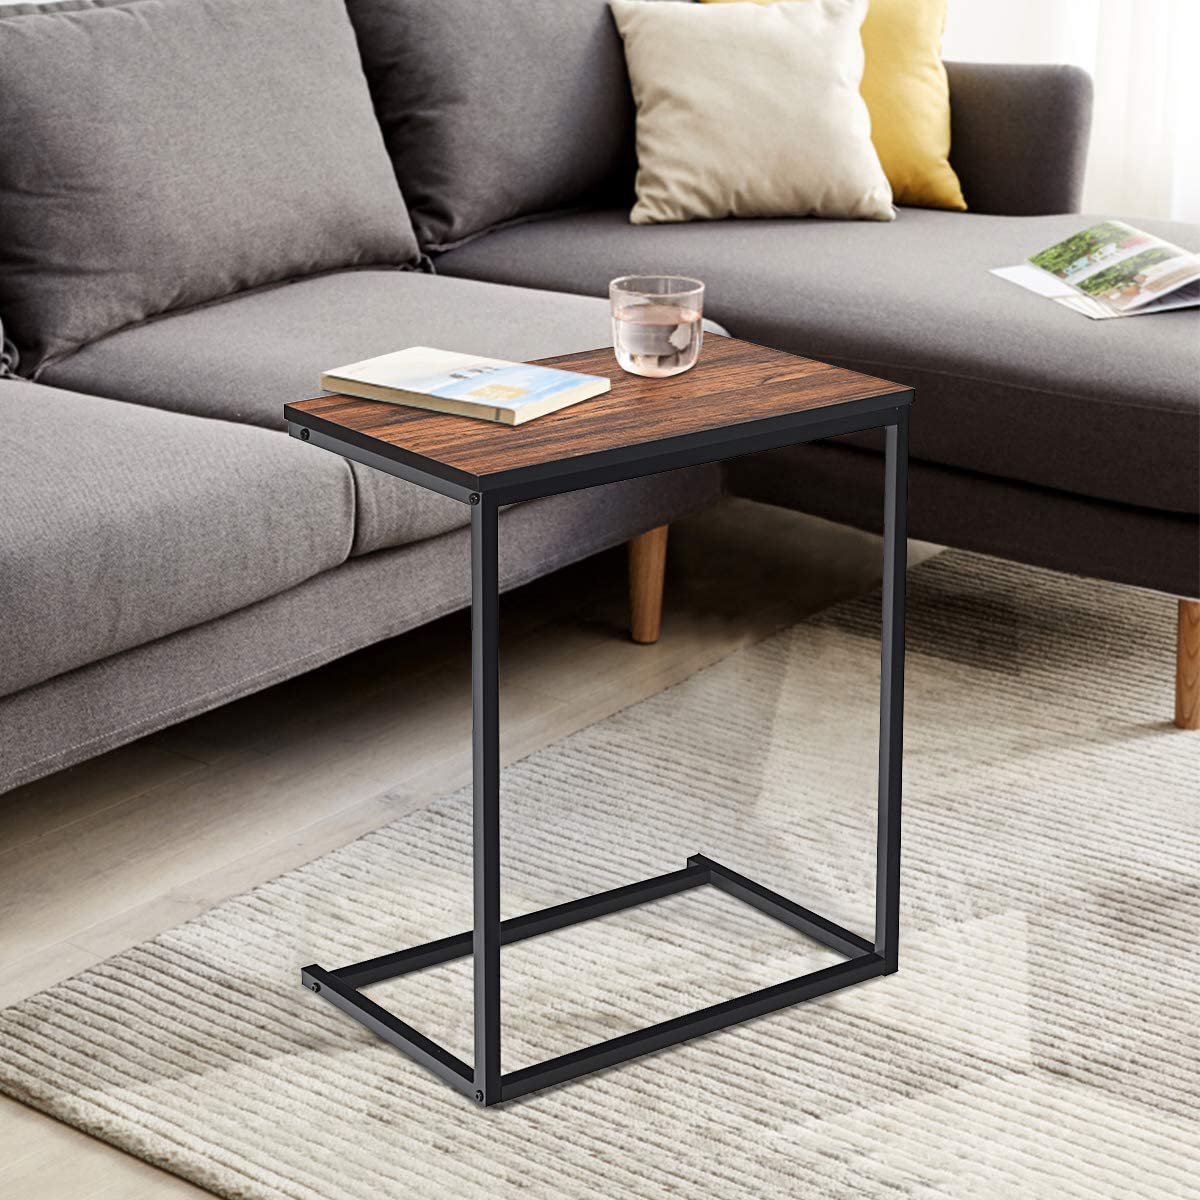 Lifespace Rustic Industrial C Shape Sofa Side Table